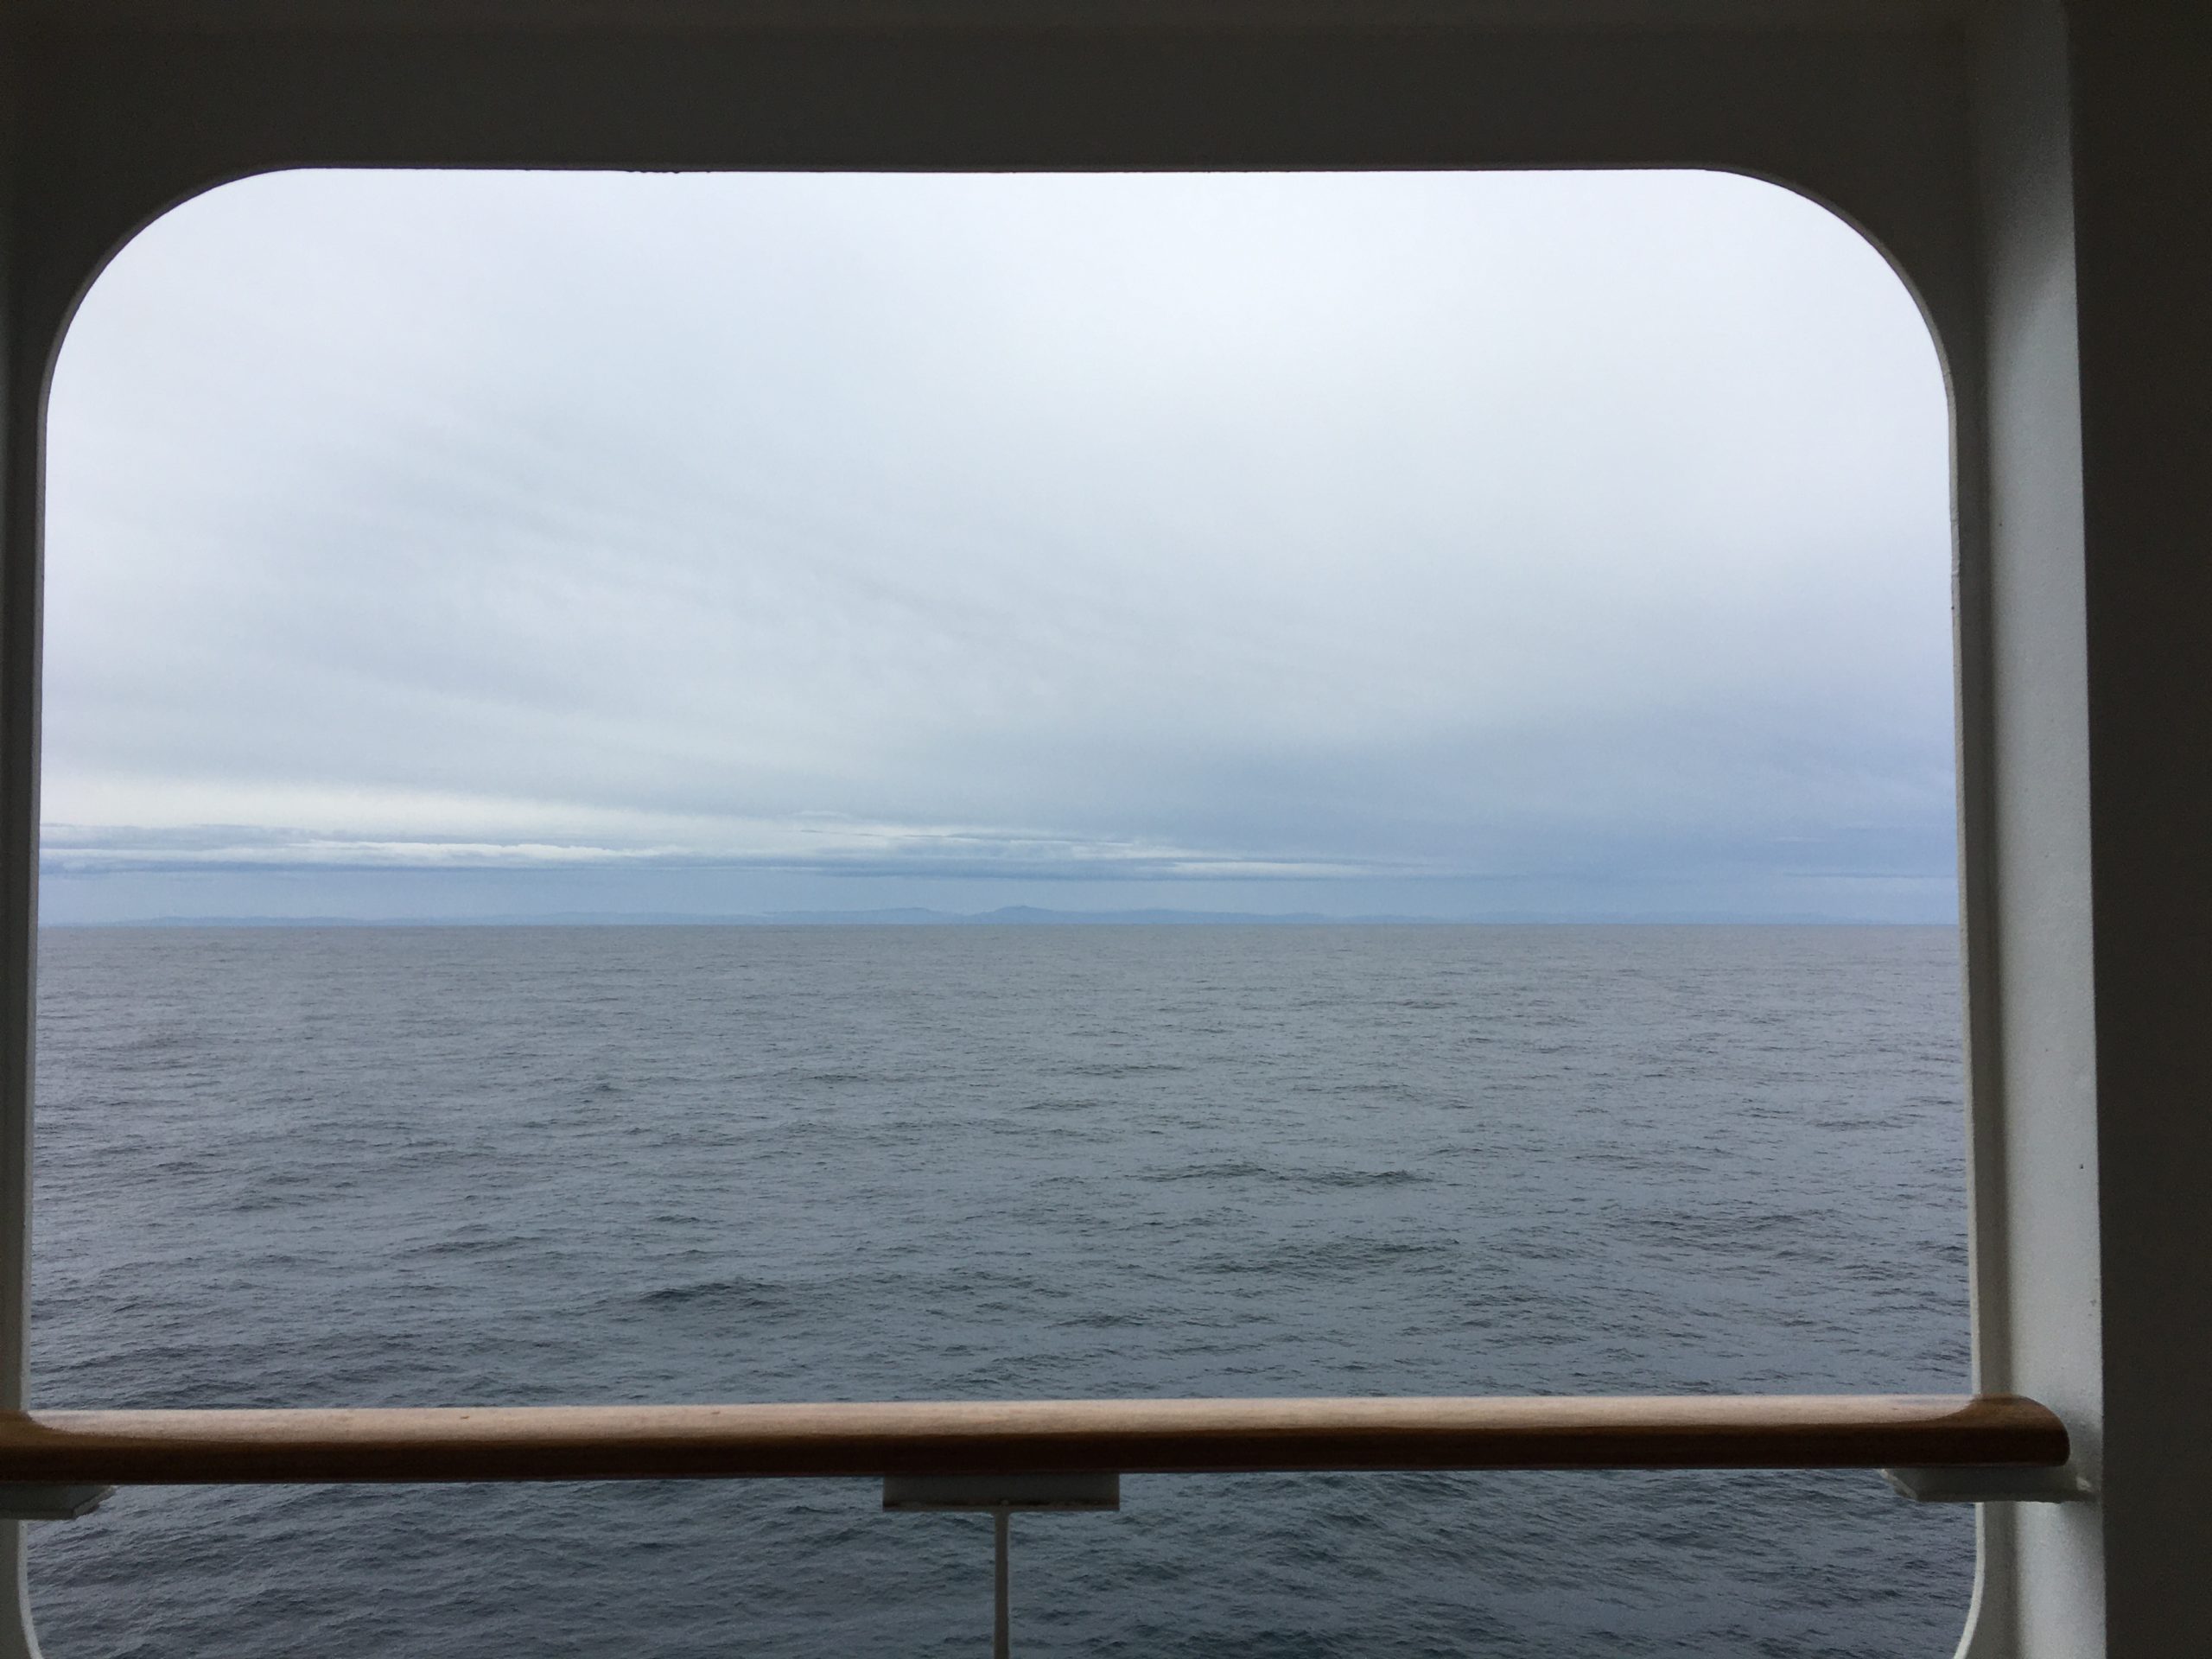 Finisterre on the horizon seen from QM2